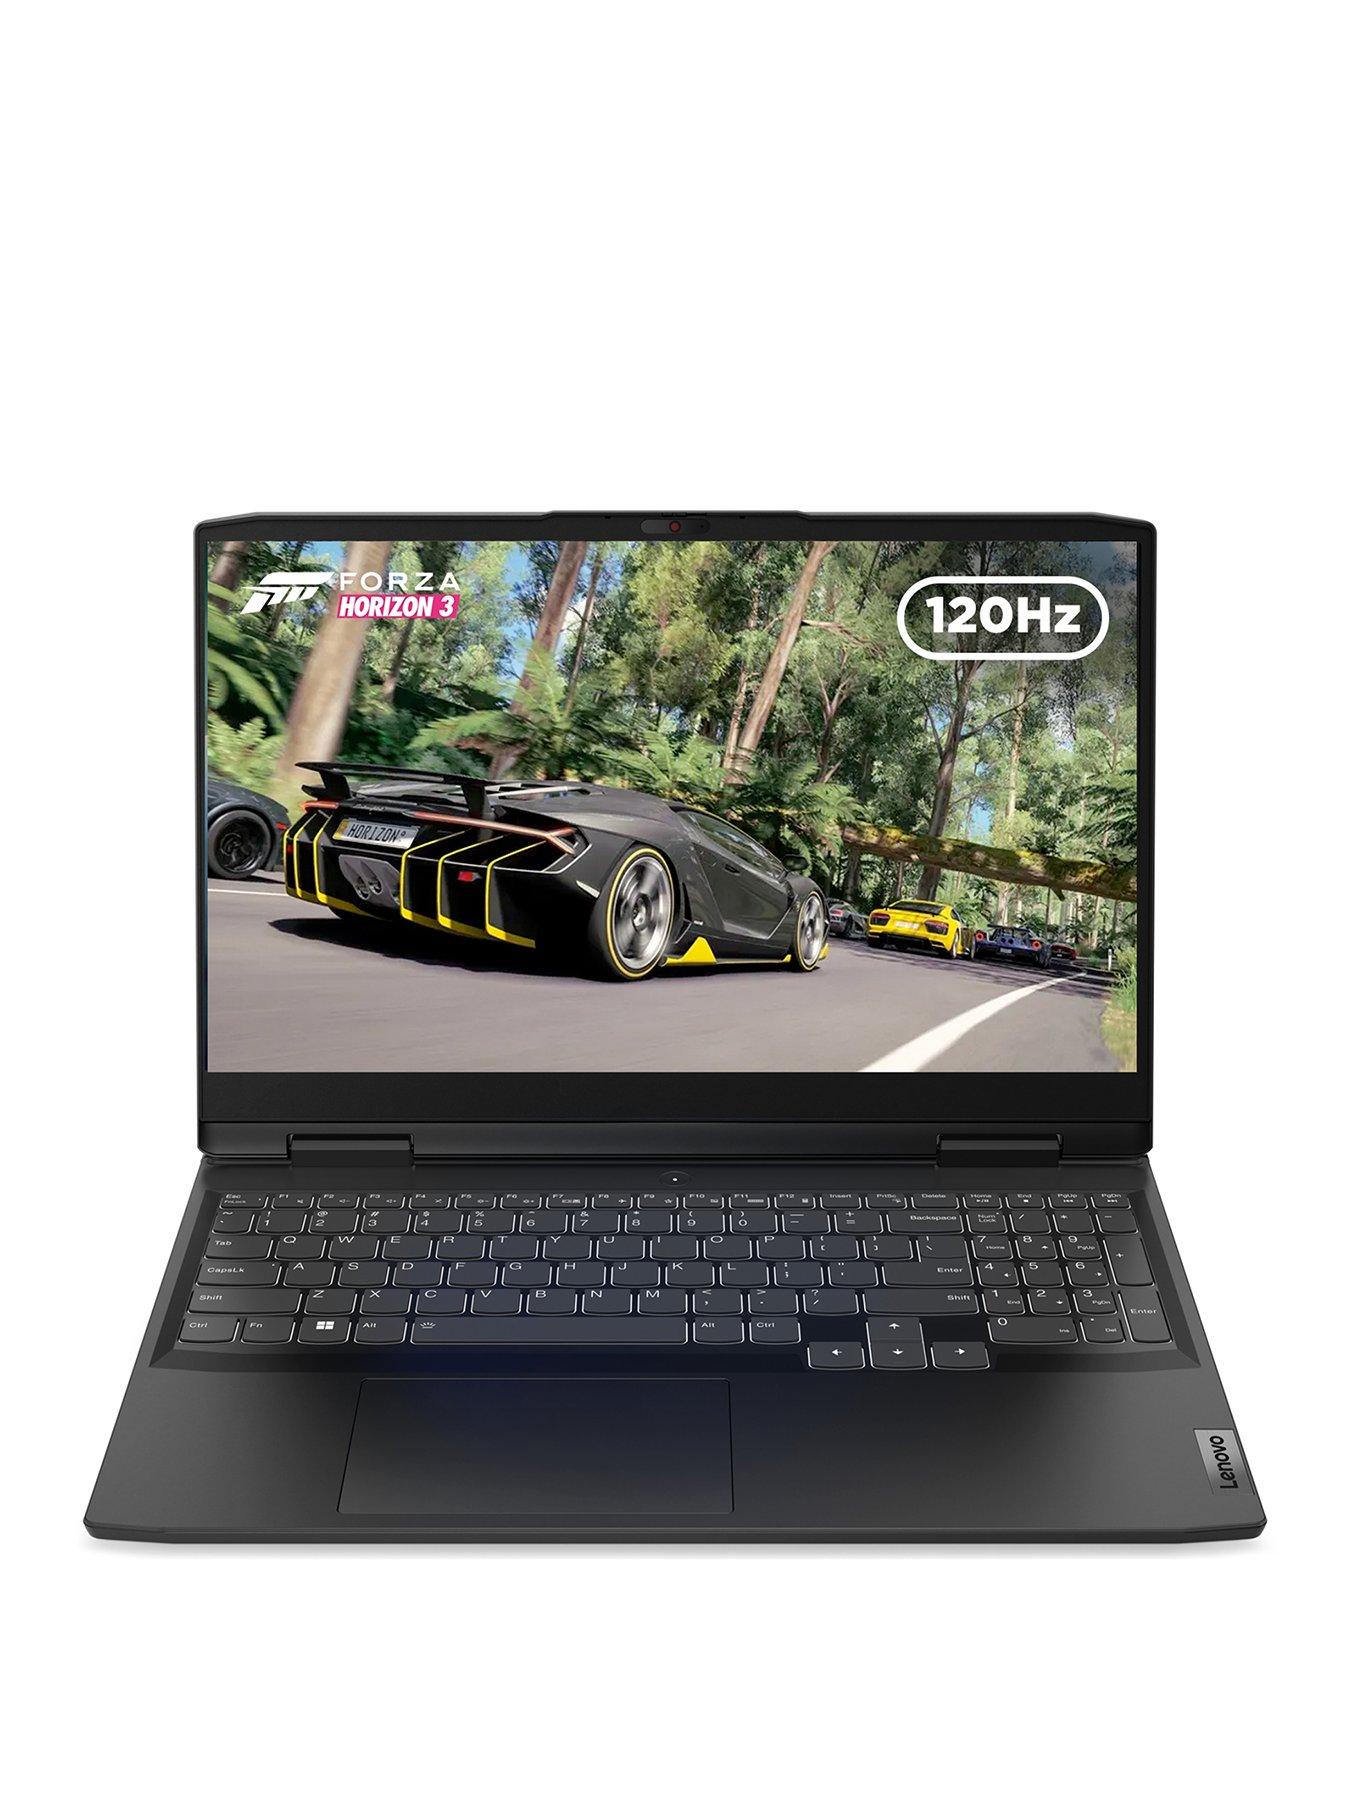 Lenovo IdeaPad Gaming 3 – Perfectly balanced for work and gaming